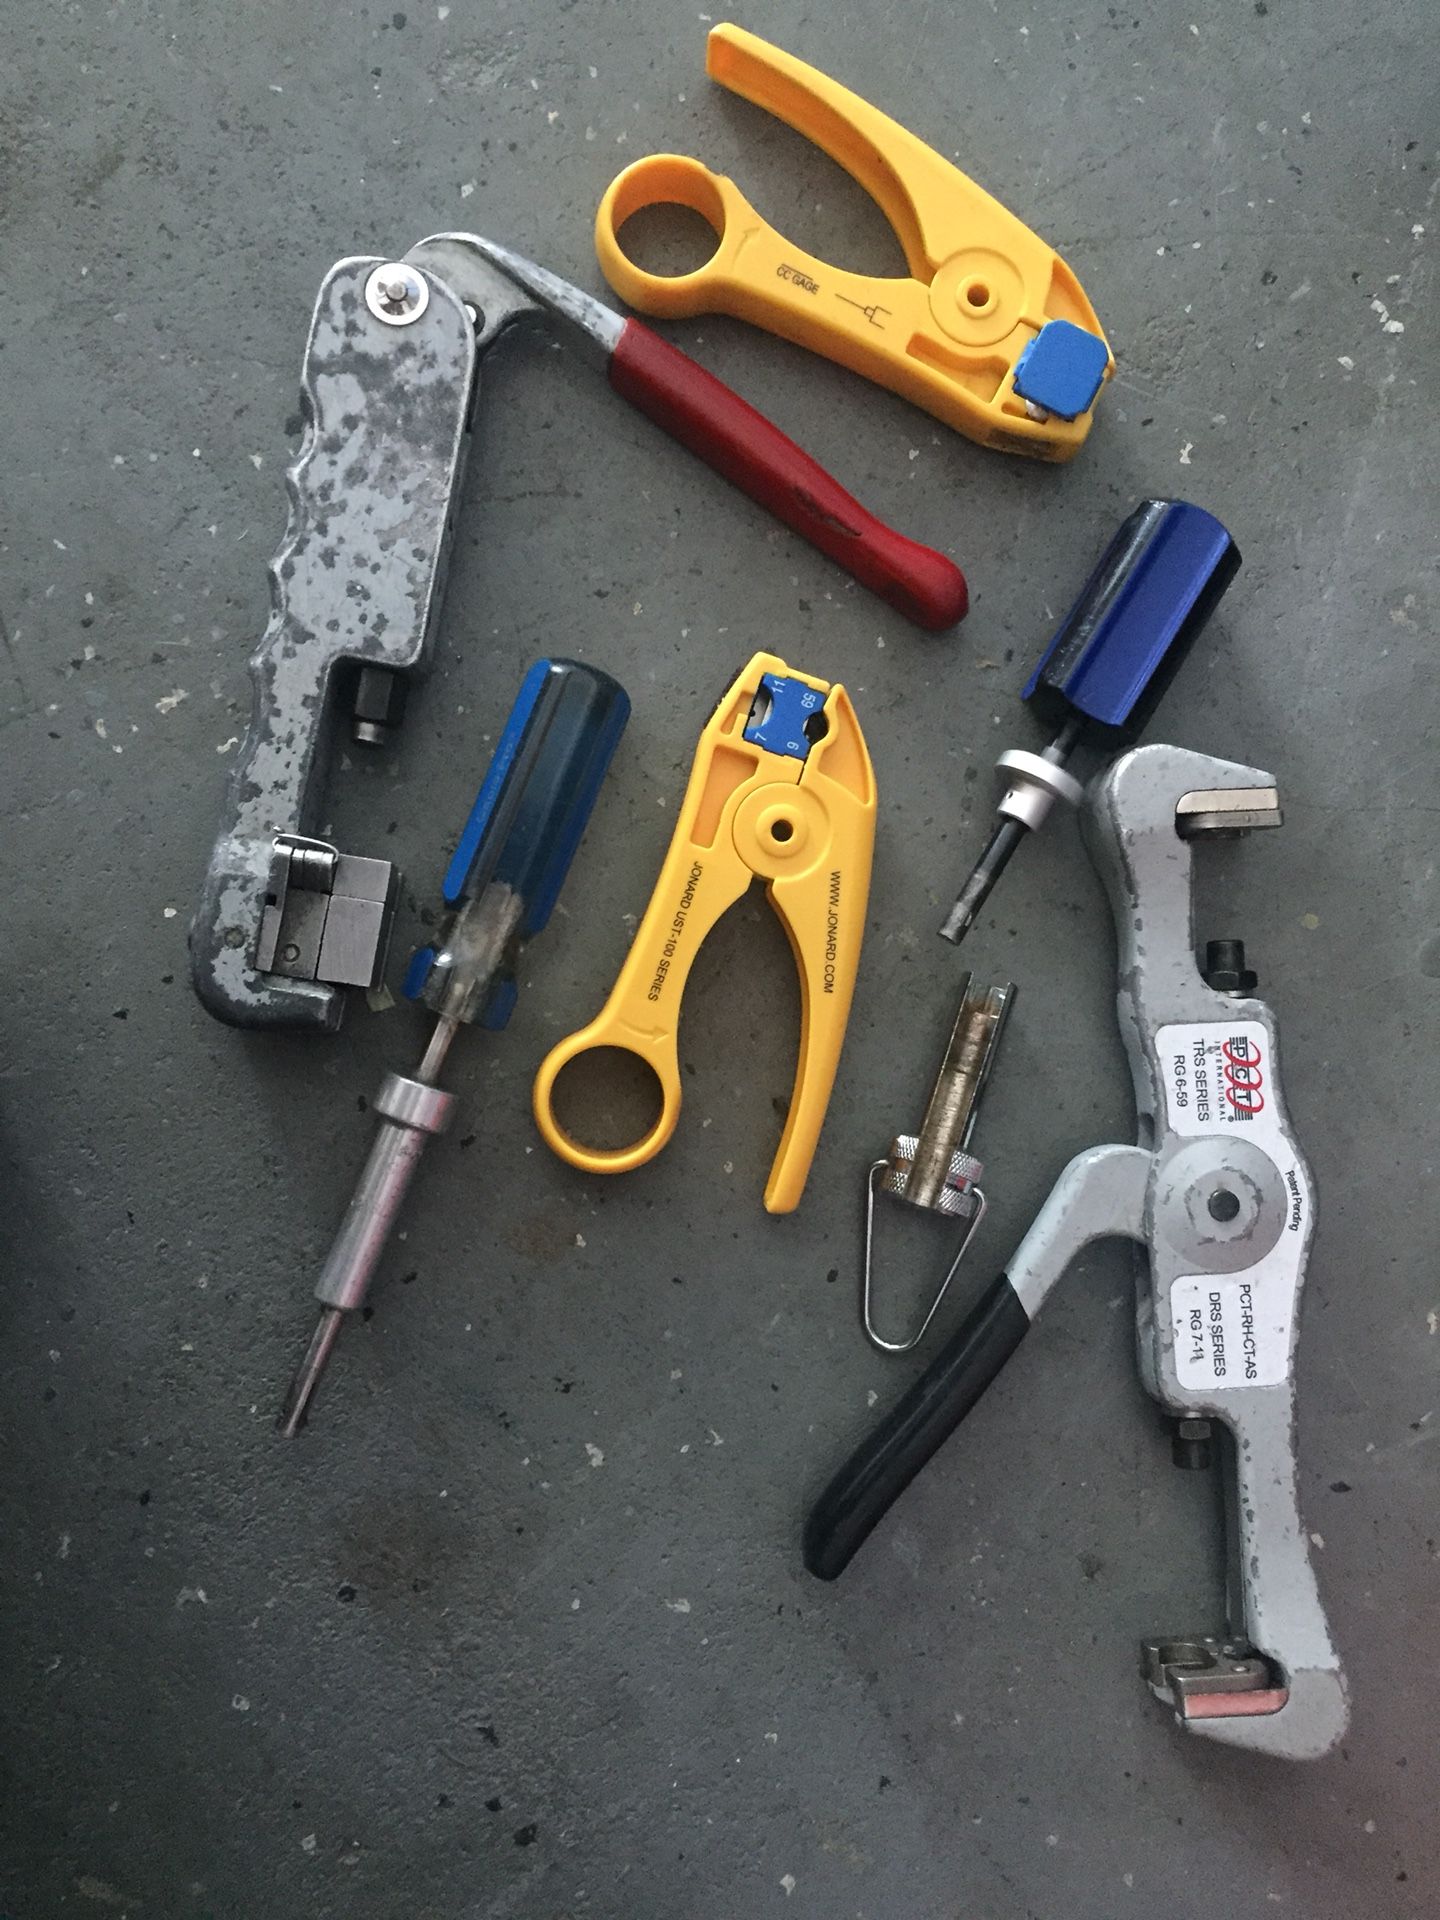 Cable installer tools